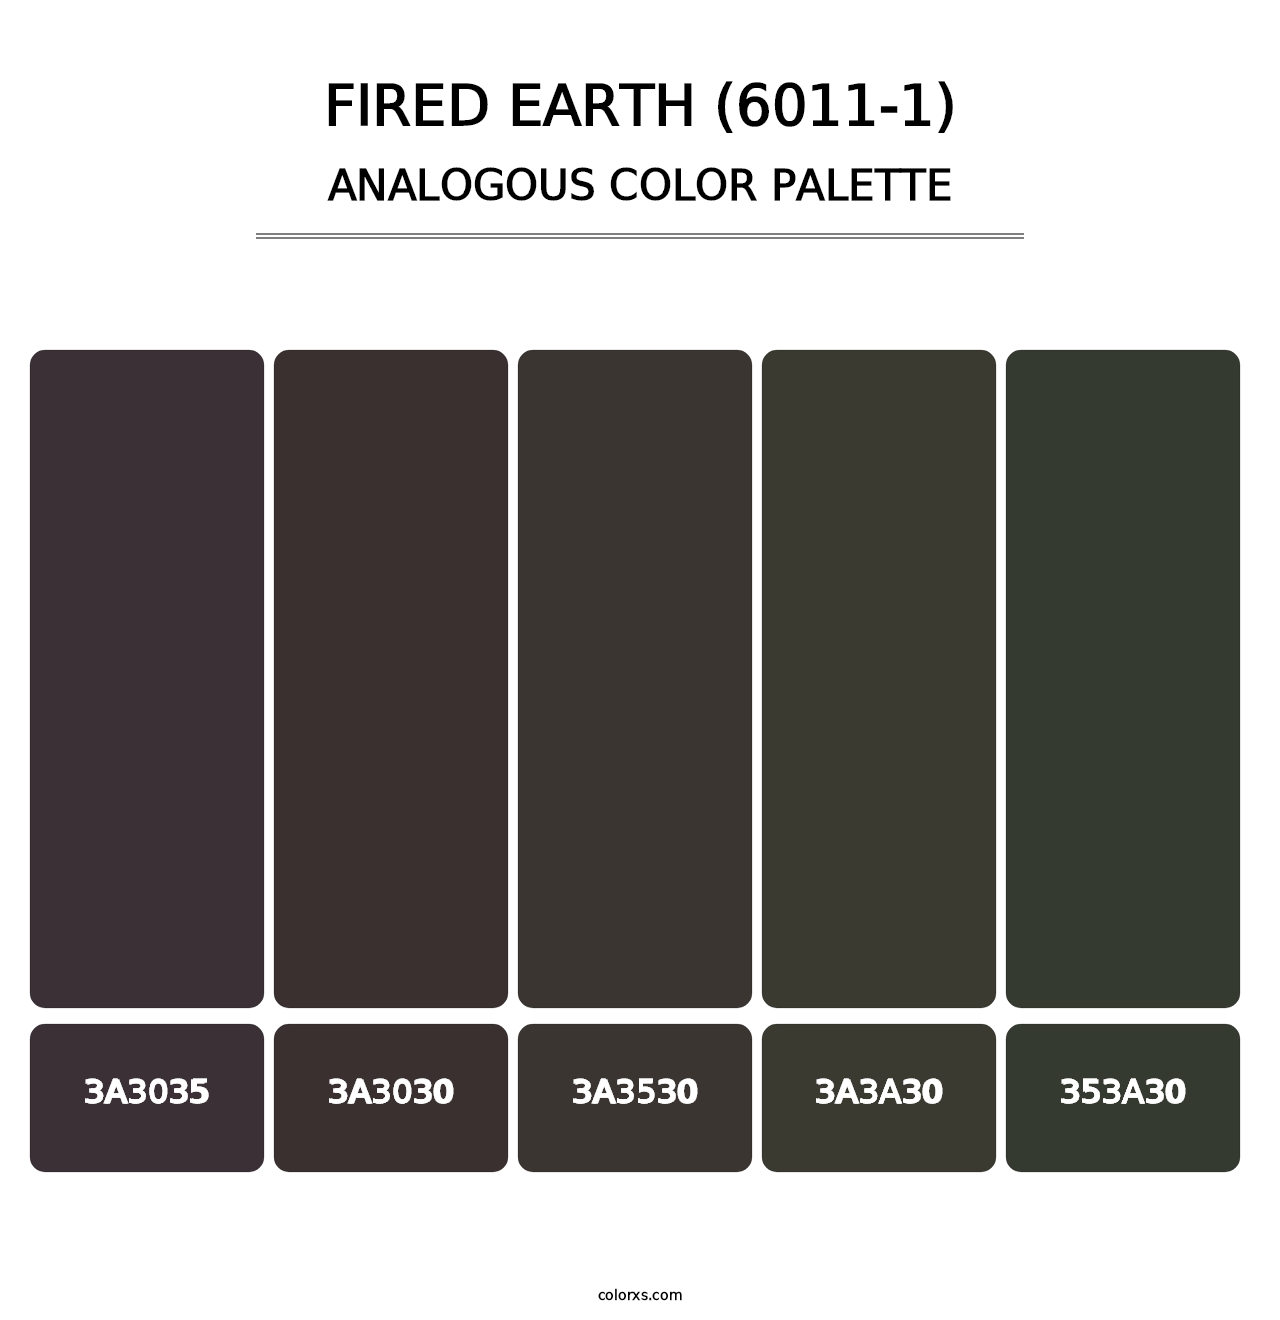 Fired Earth (6011-1) - Analogous Color Palette